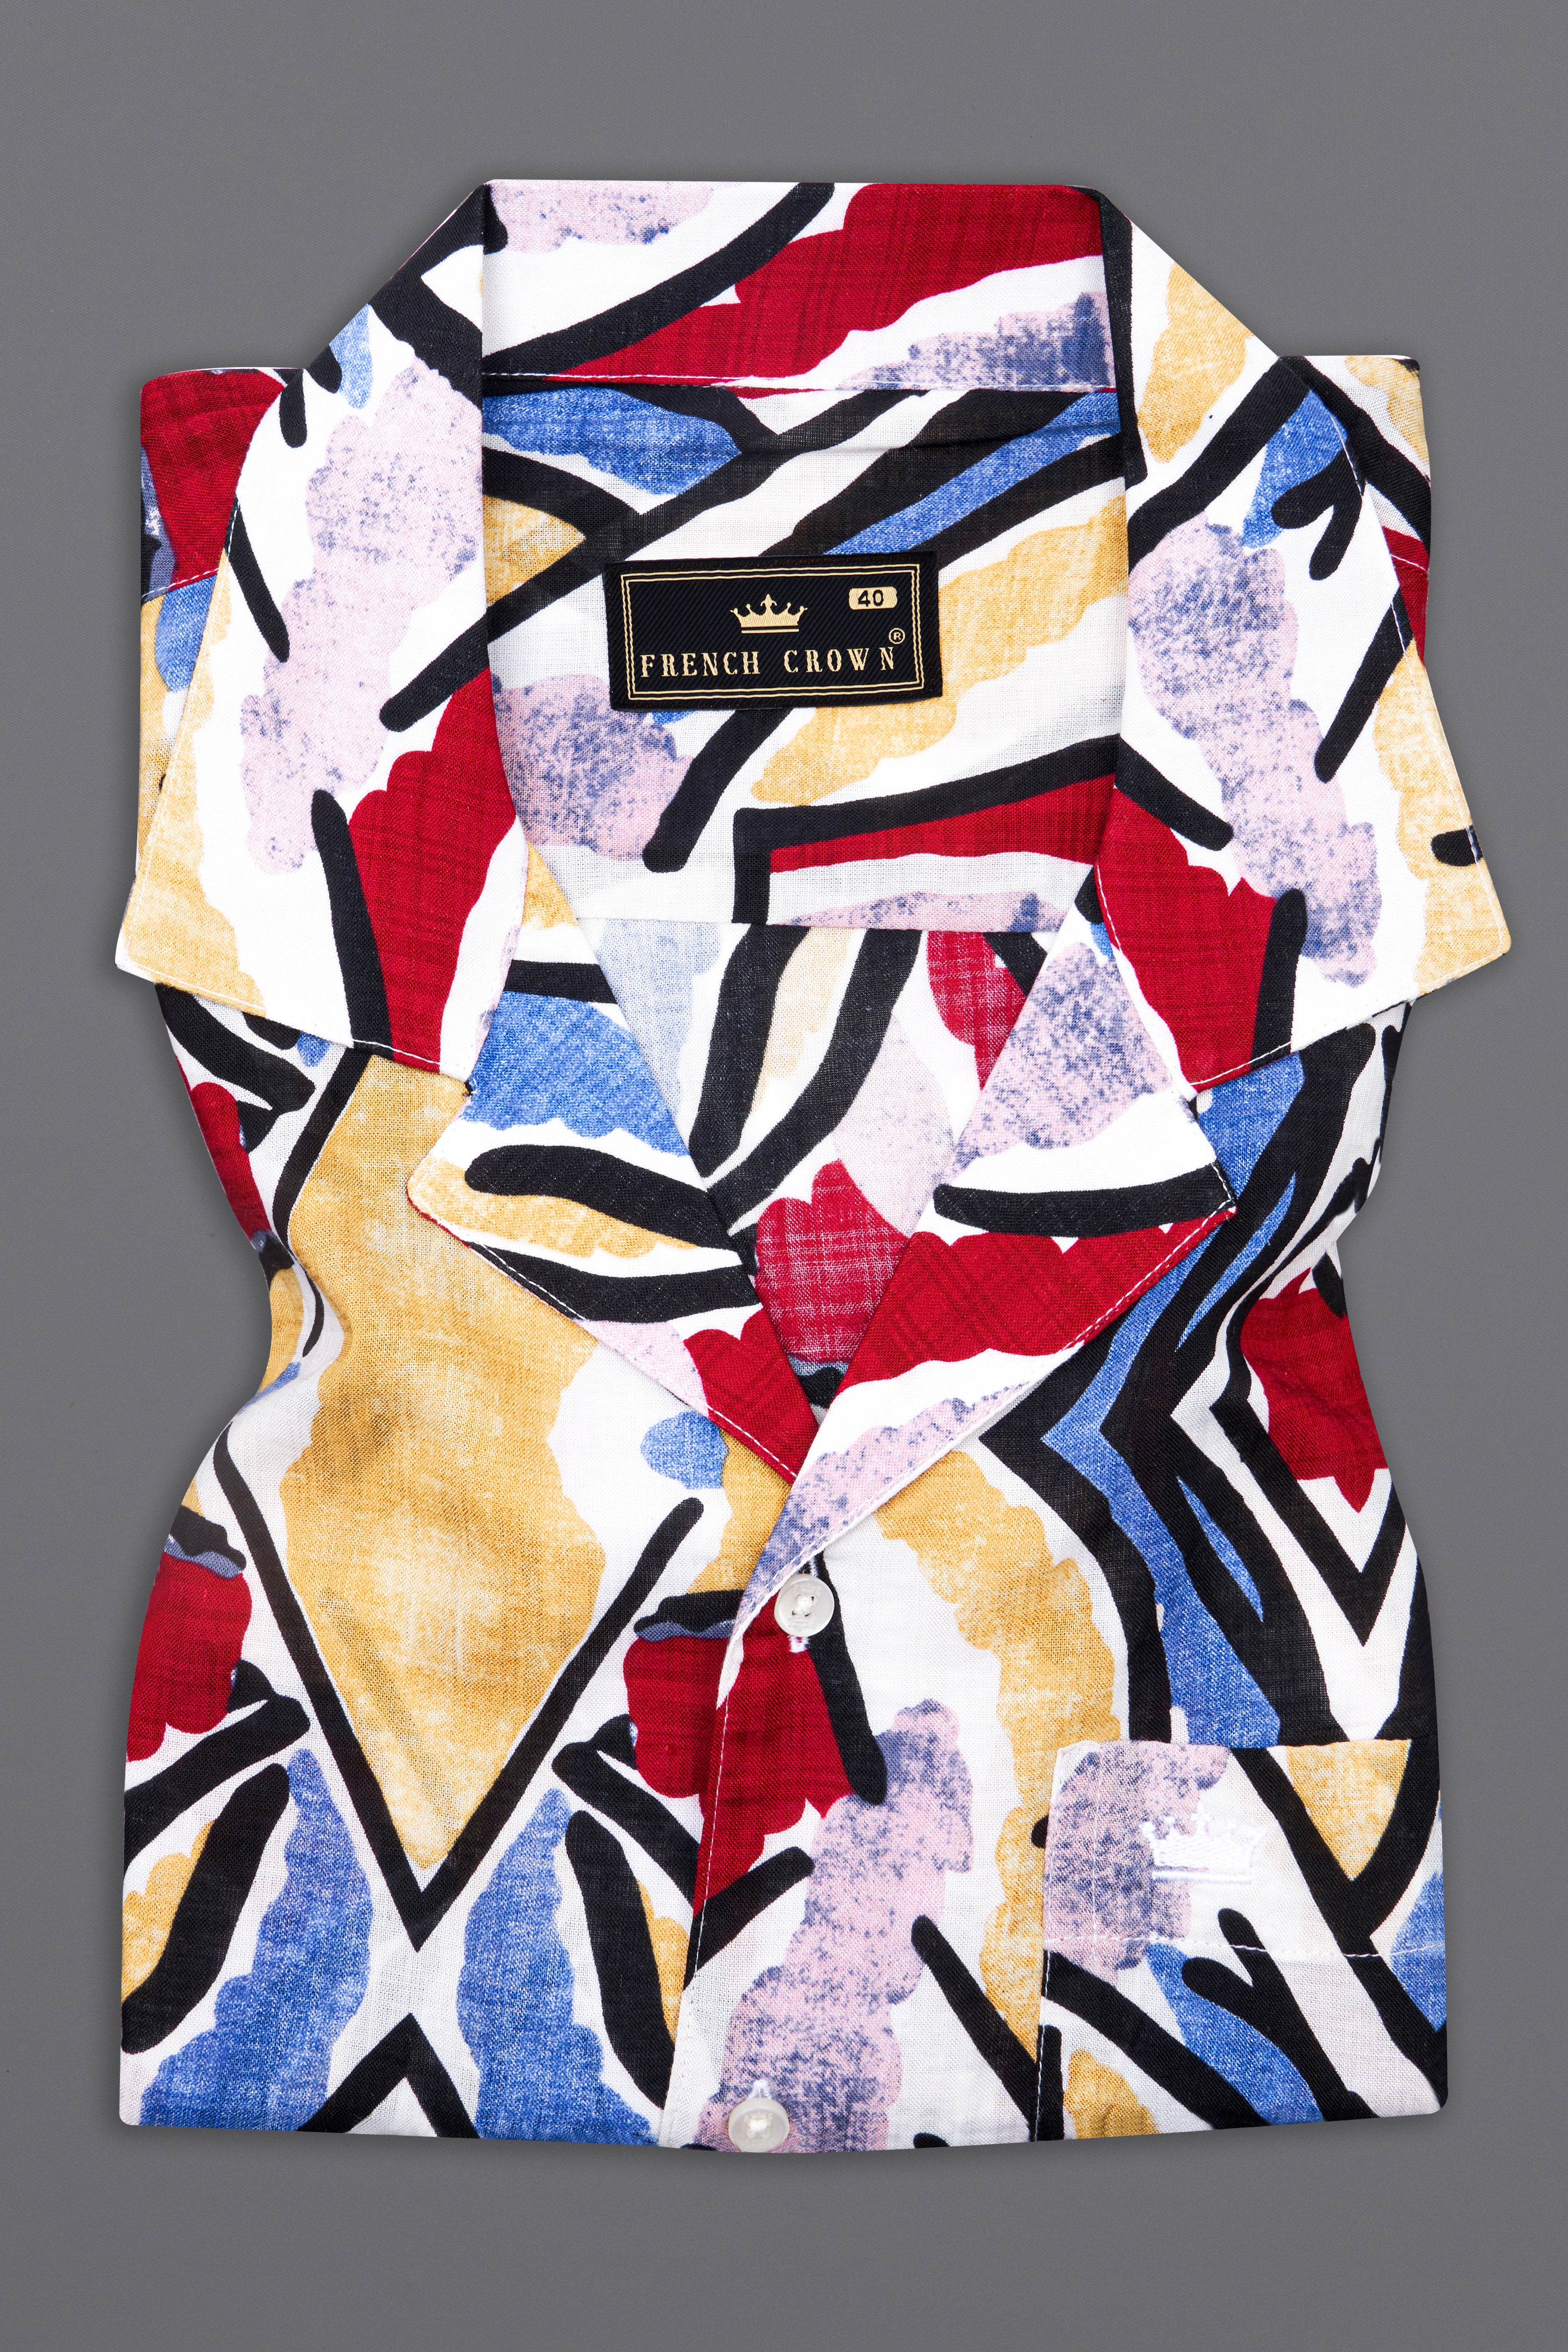 Neptune Blue and Pavlova Brown Multicolour Abstract Printed Lightweight Oversized Premium Cotton Shirt